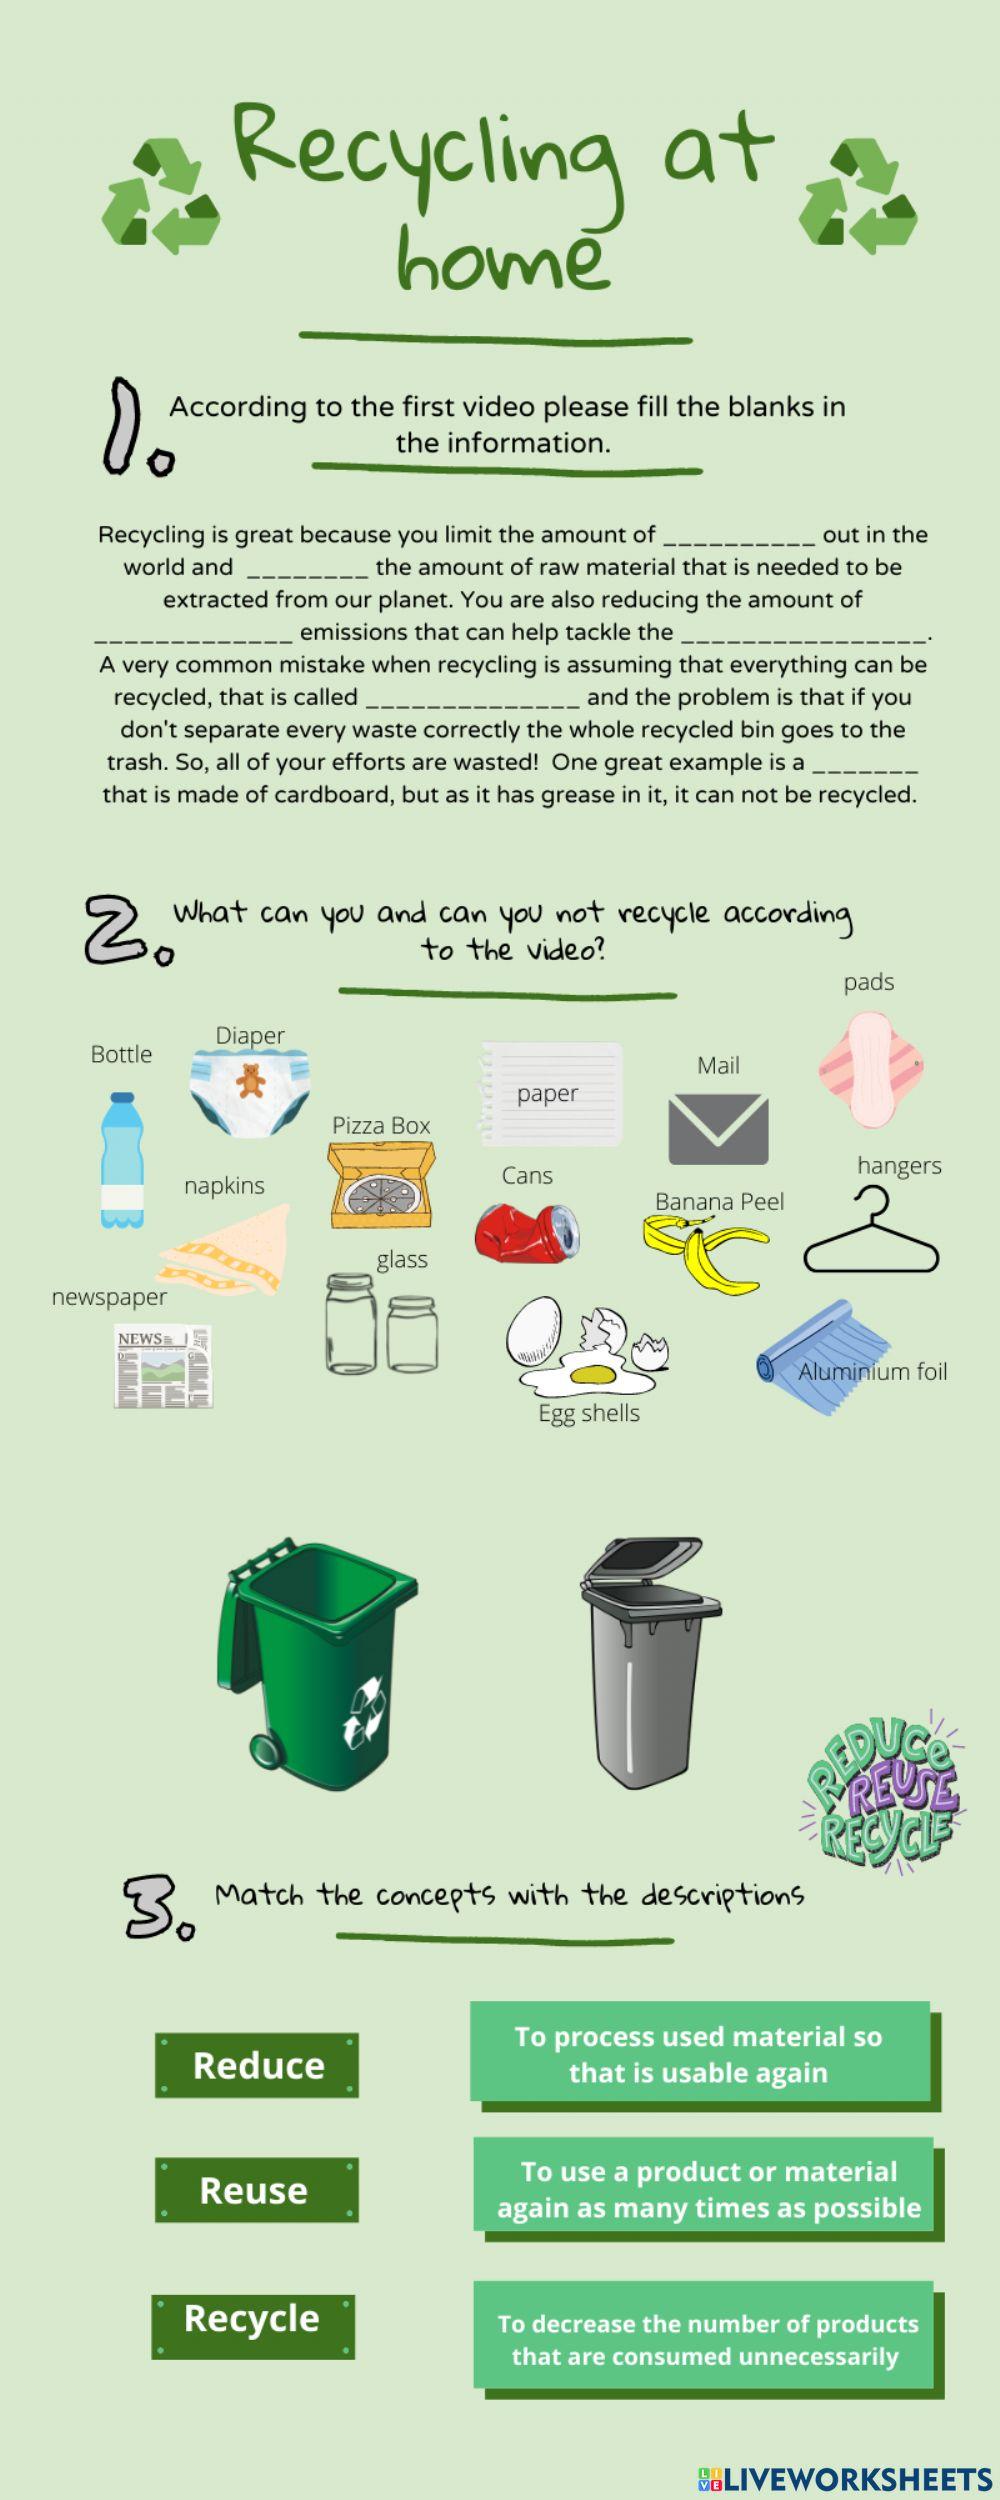 Recycling at home